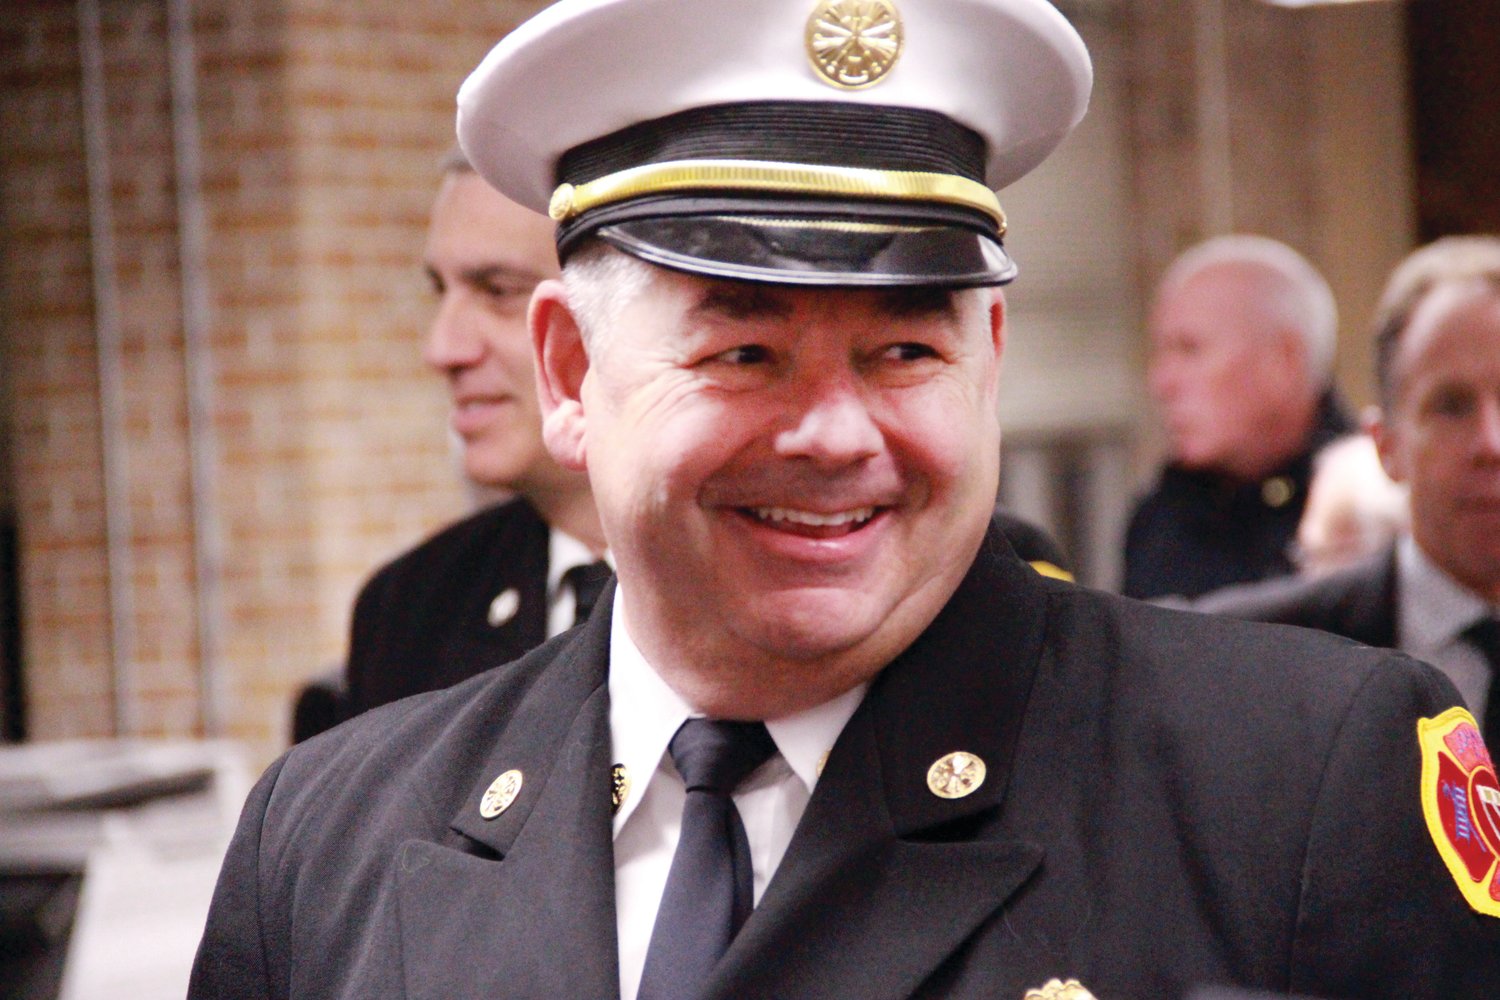 JFD: Johnston’s new Fire Chief David Iannuccilli took the oath of office Monday night, replacing Peter Lamb.